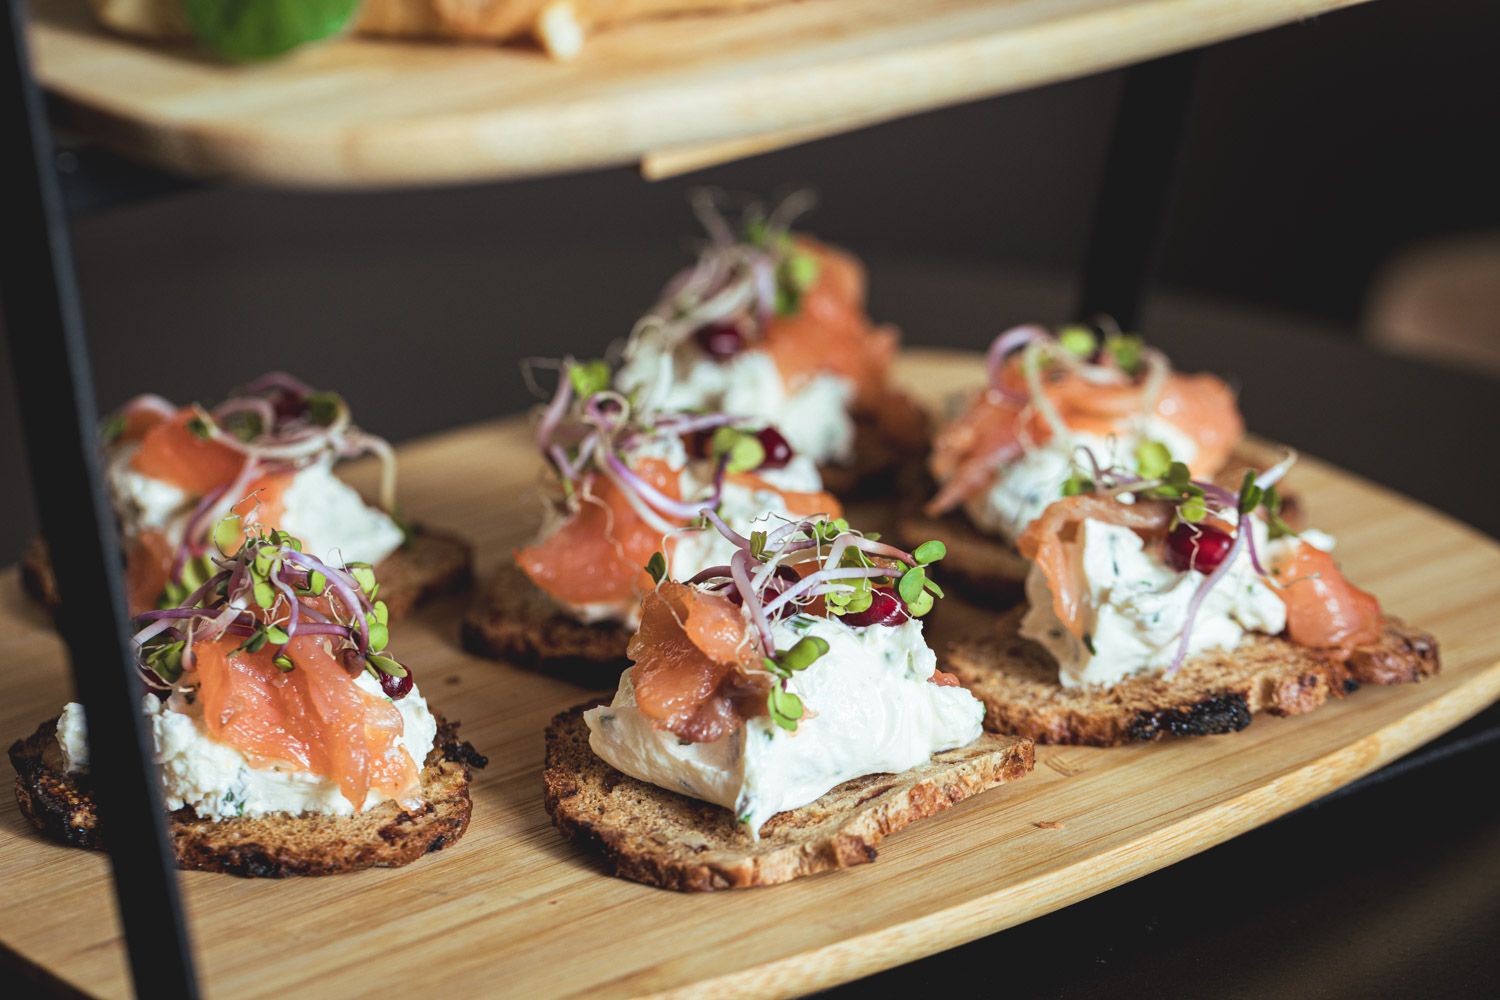 Slices of bread with creme cheese and smoked salmon, The Julius Prague 